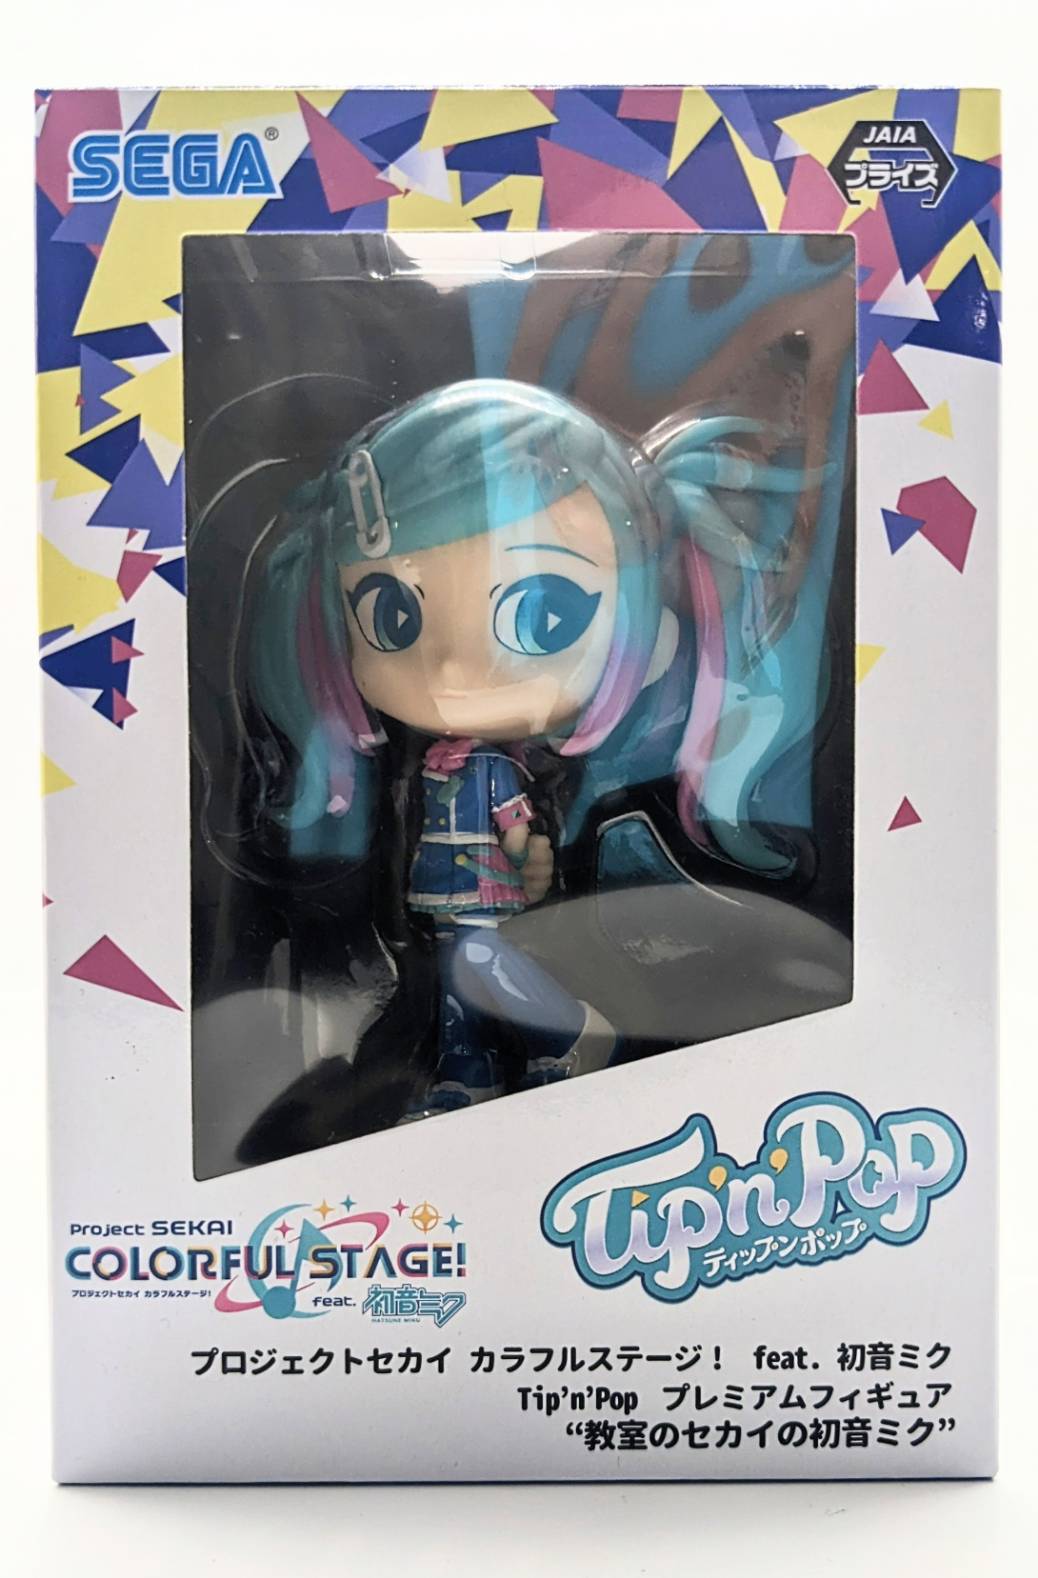 Project Sekai Colorful Stage! feat. Hatsune Miku Tip'n'Pop Premium Figure "Hatsune Miku from the Classroom World" Another Color